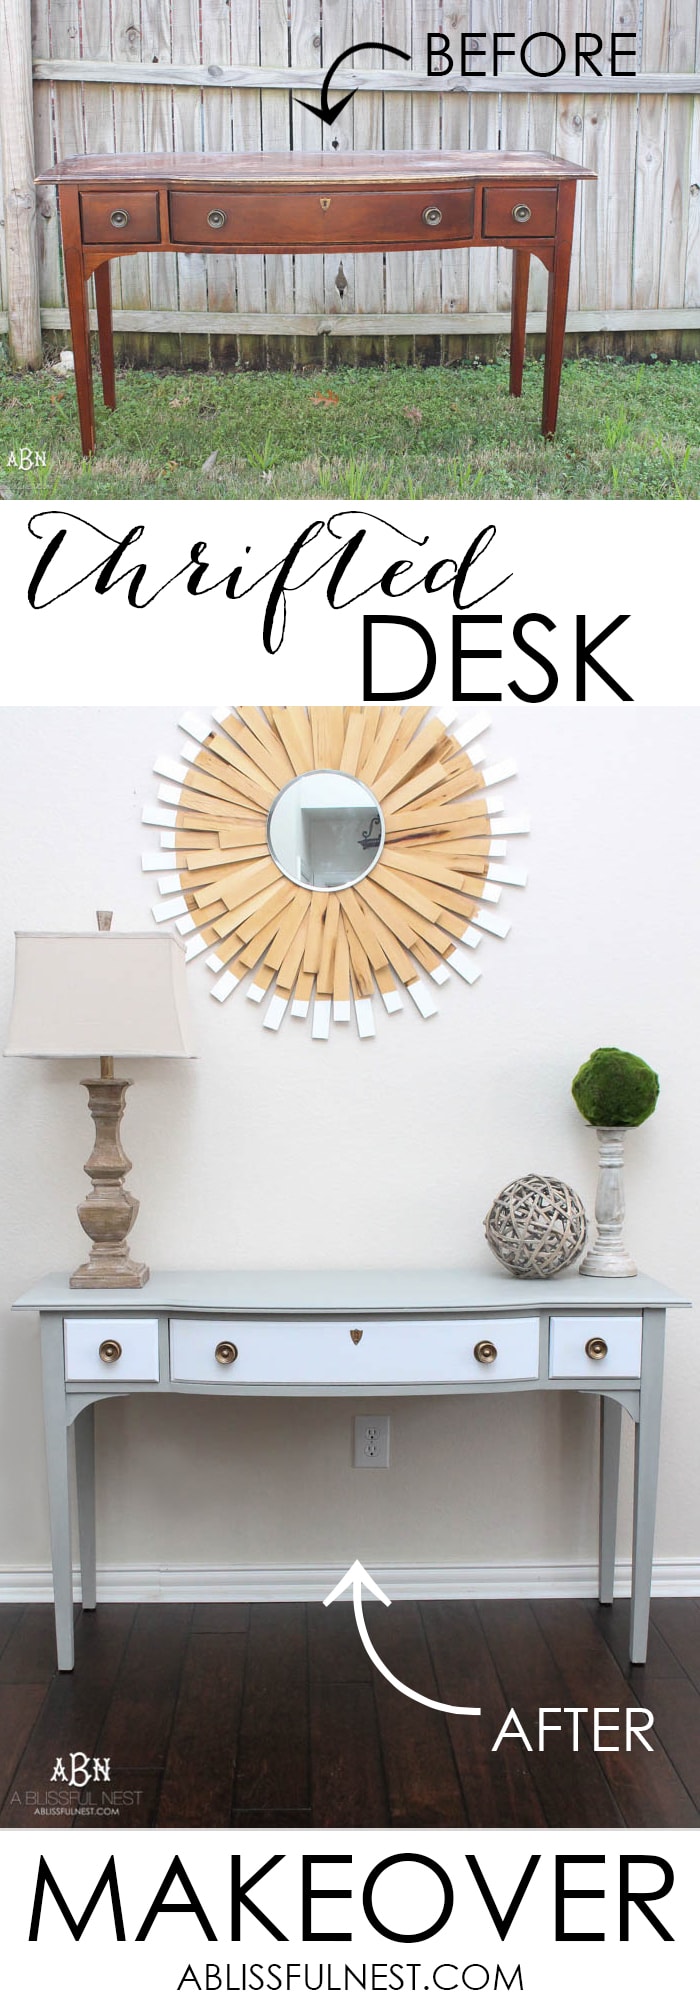 What an amazing before and after on this thrifted desk! Such a great idea. More on https://ablissfulnest.com/ #deskmakeover #chalkfurniturepaint